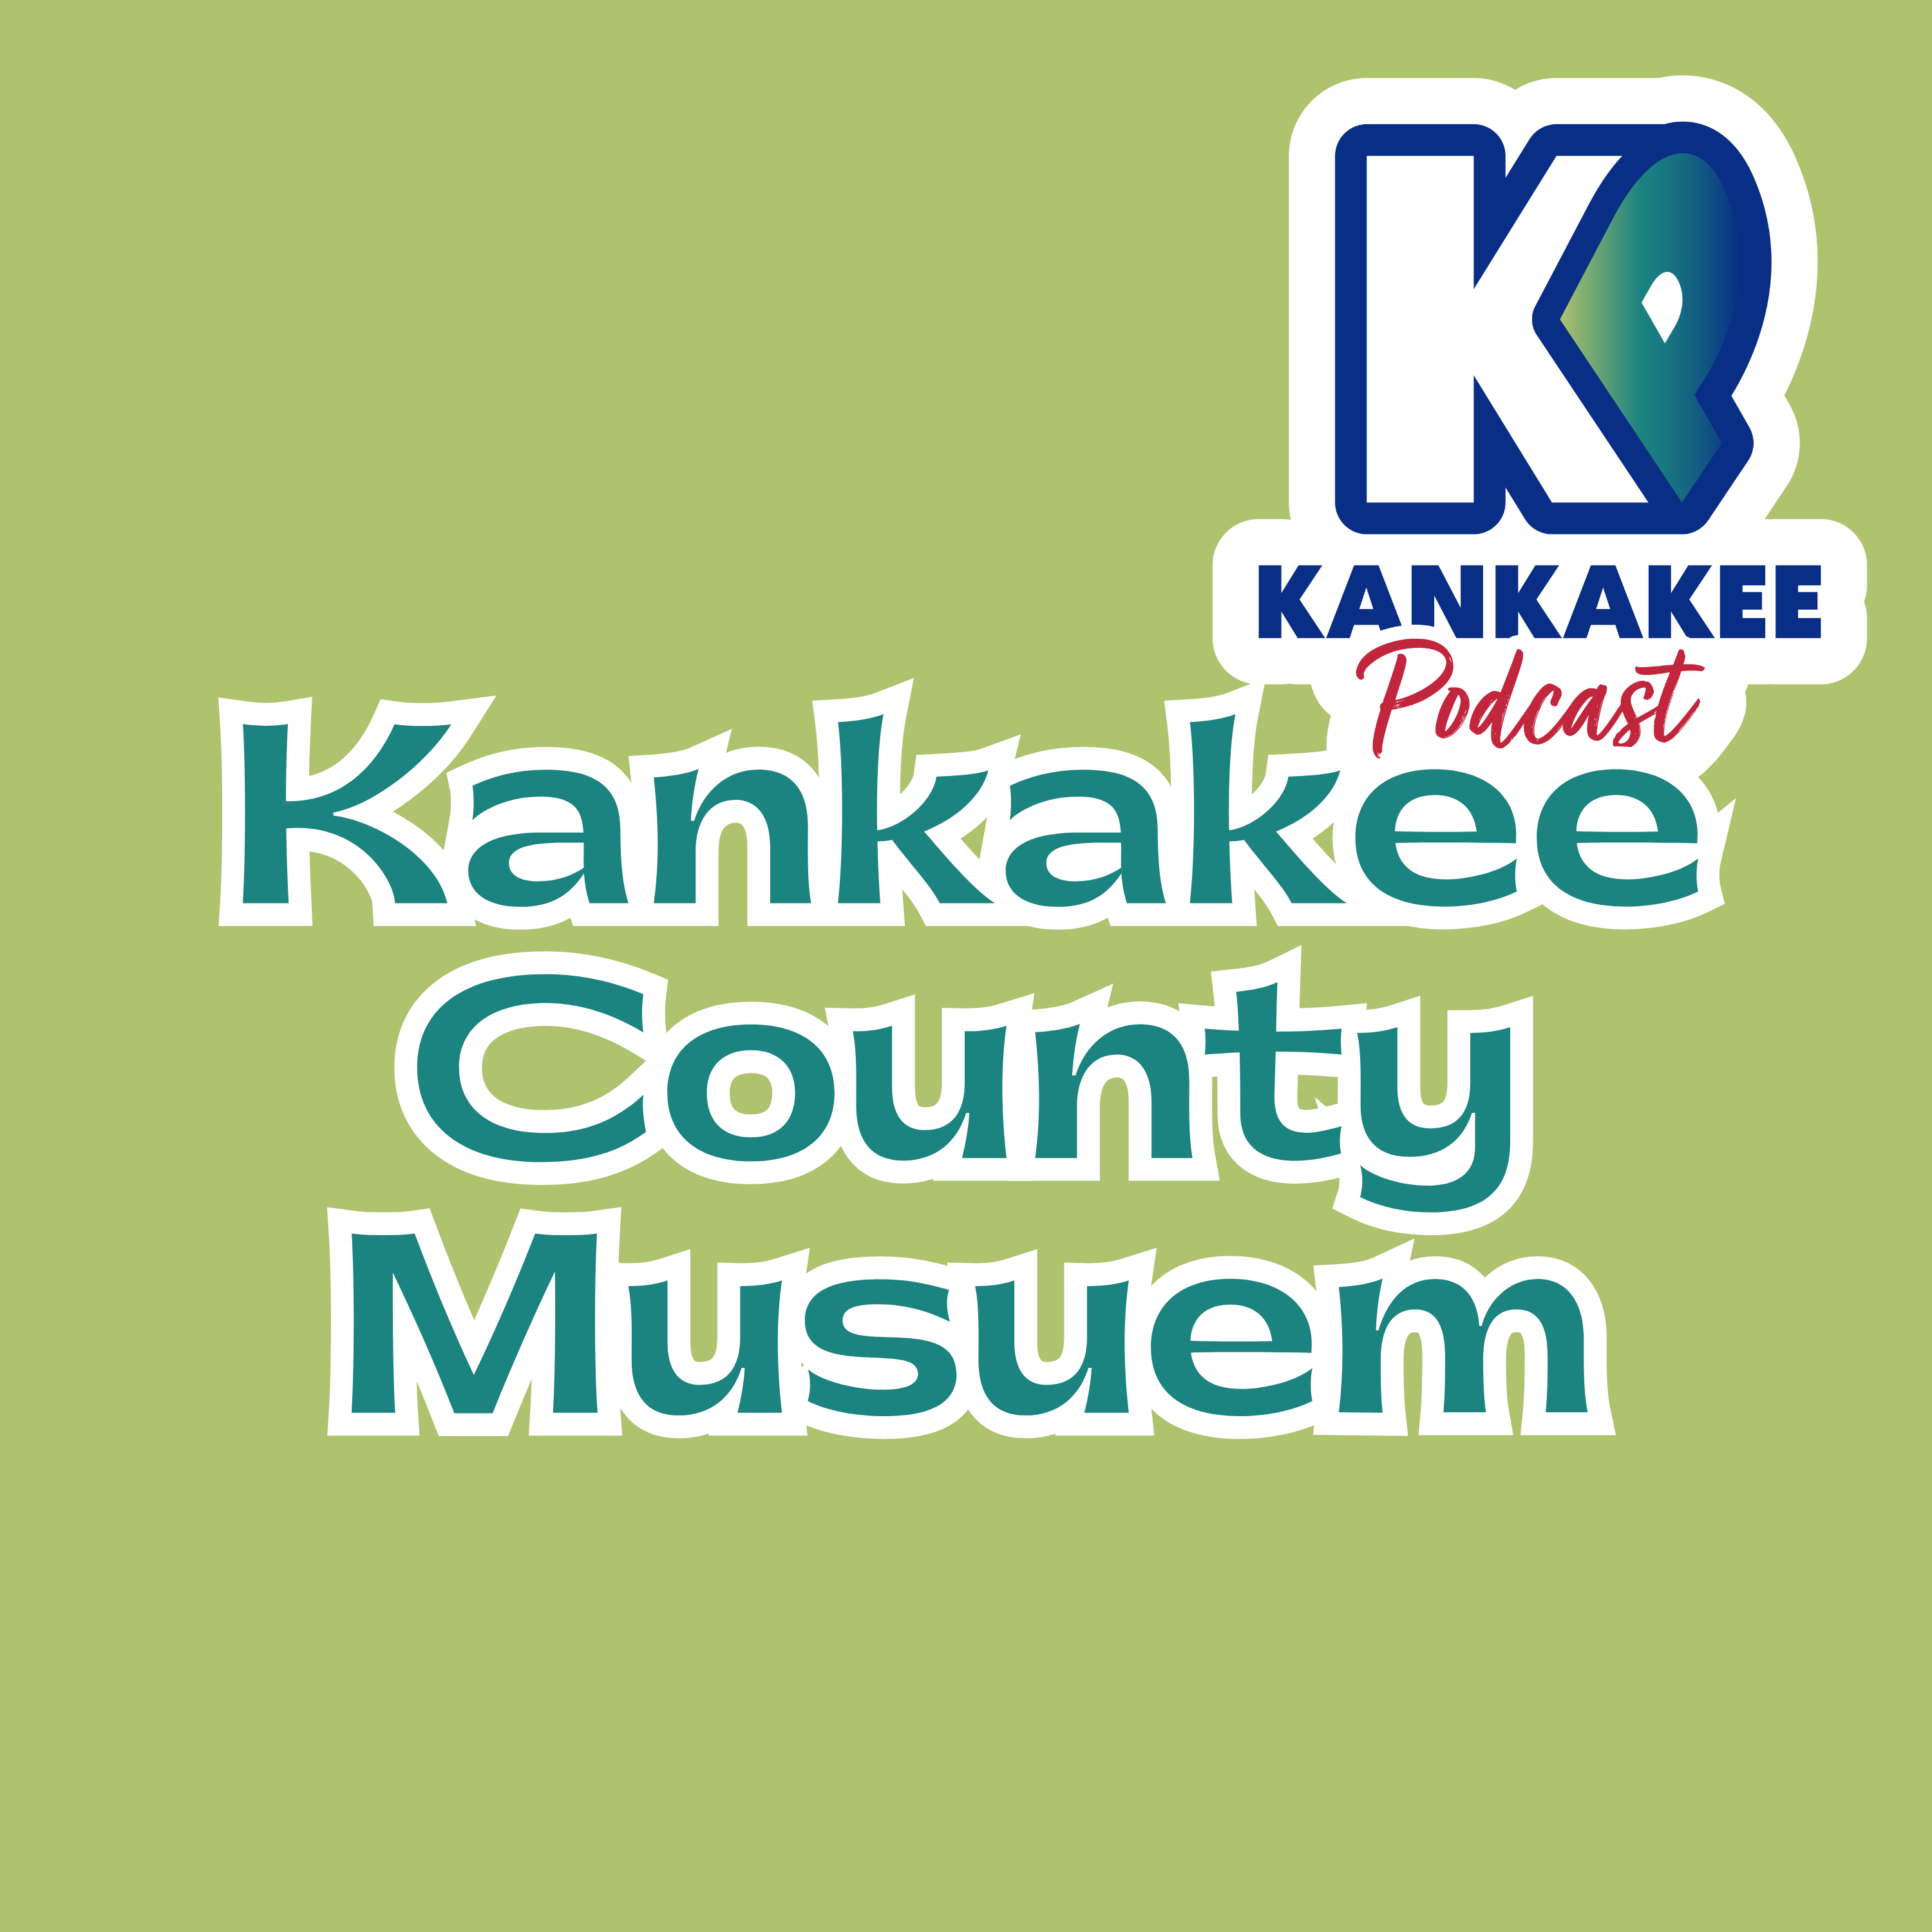 #135: Tracing Kankakee’s Immigration Story with the Kankakee County Museum